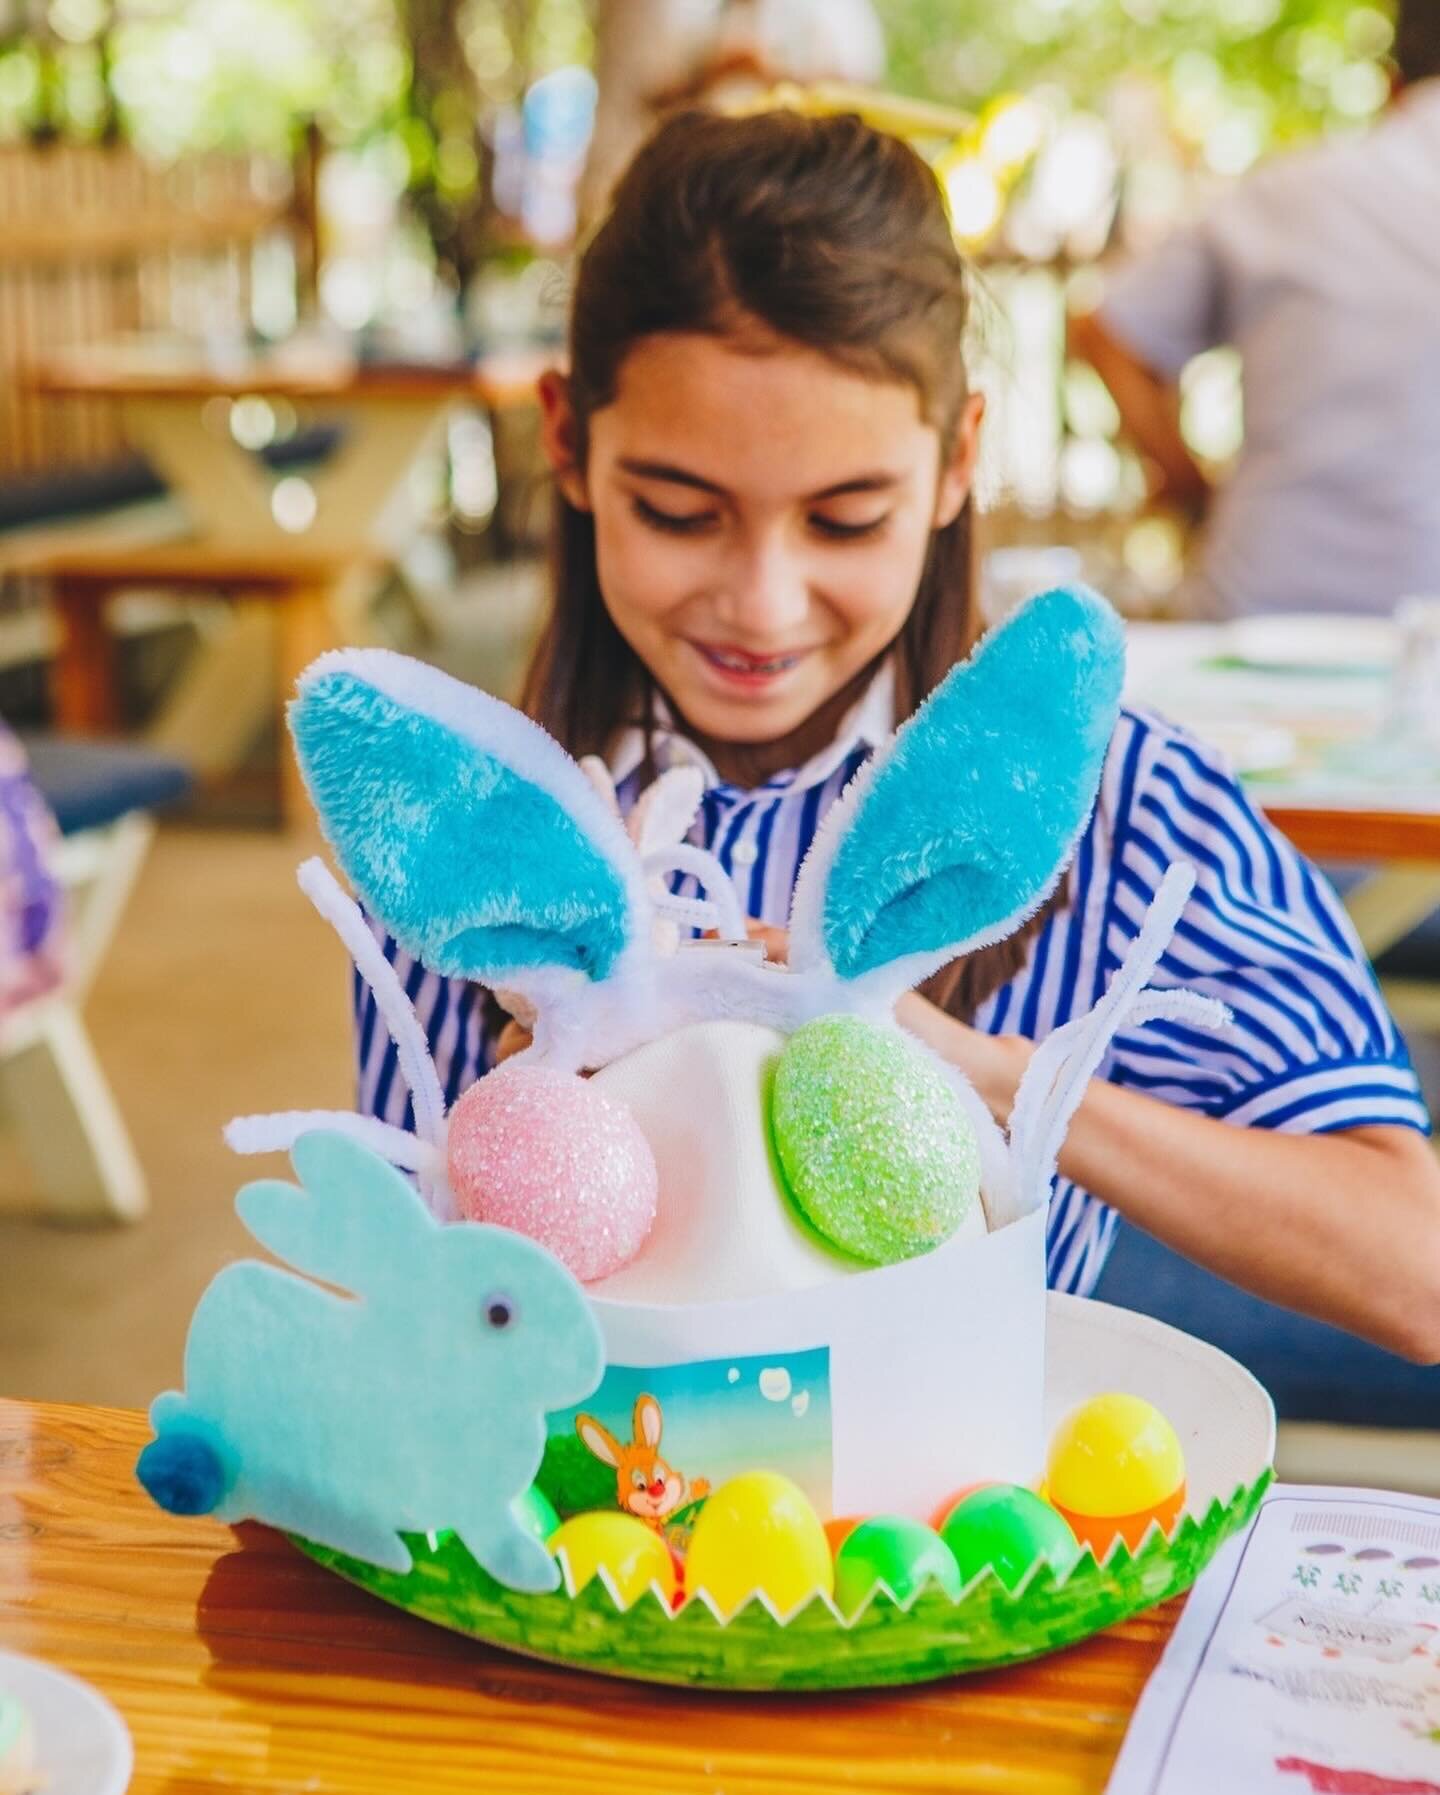 We&rsquo;re gearing up for our Easter Celebrations on the farm! Join us for a traditional family-style brunch and an egg hunt in our gardens filled with hidden treasures, promising a day of play and excitement for the whole family.
⠀⠀⠀⠀⠀⠀⠀⠀⠀
The high